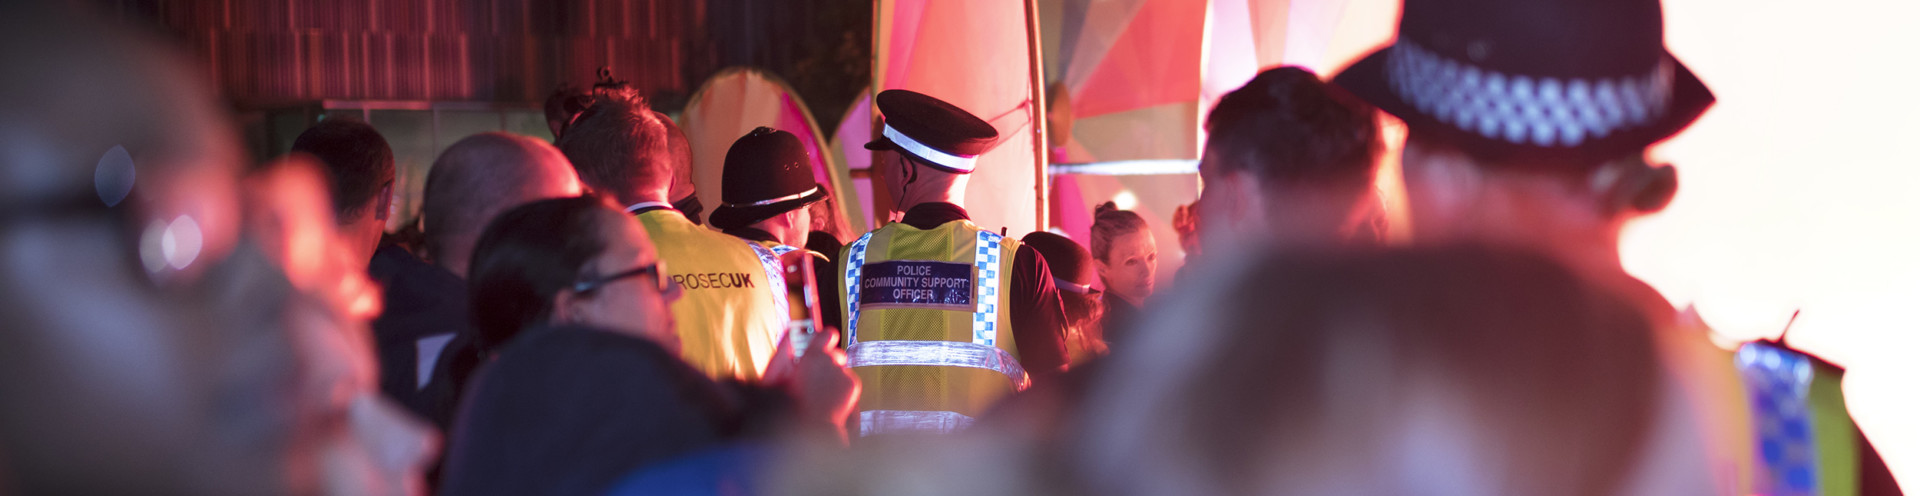 Police monitor a crowd at a festival in the UK